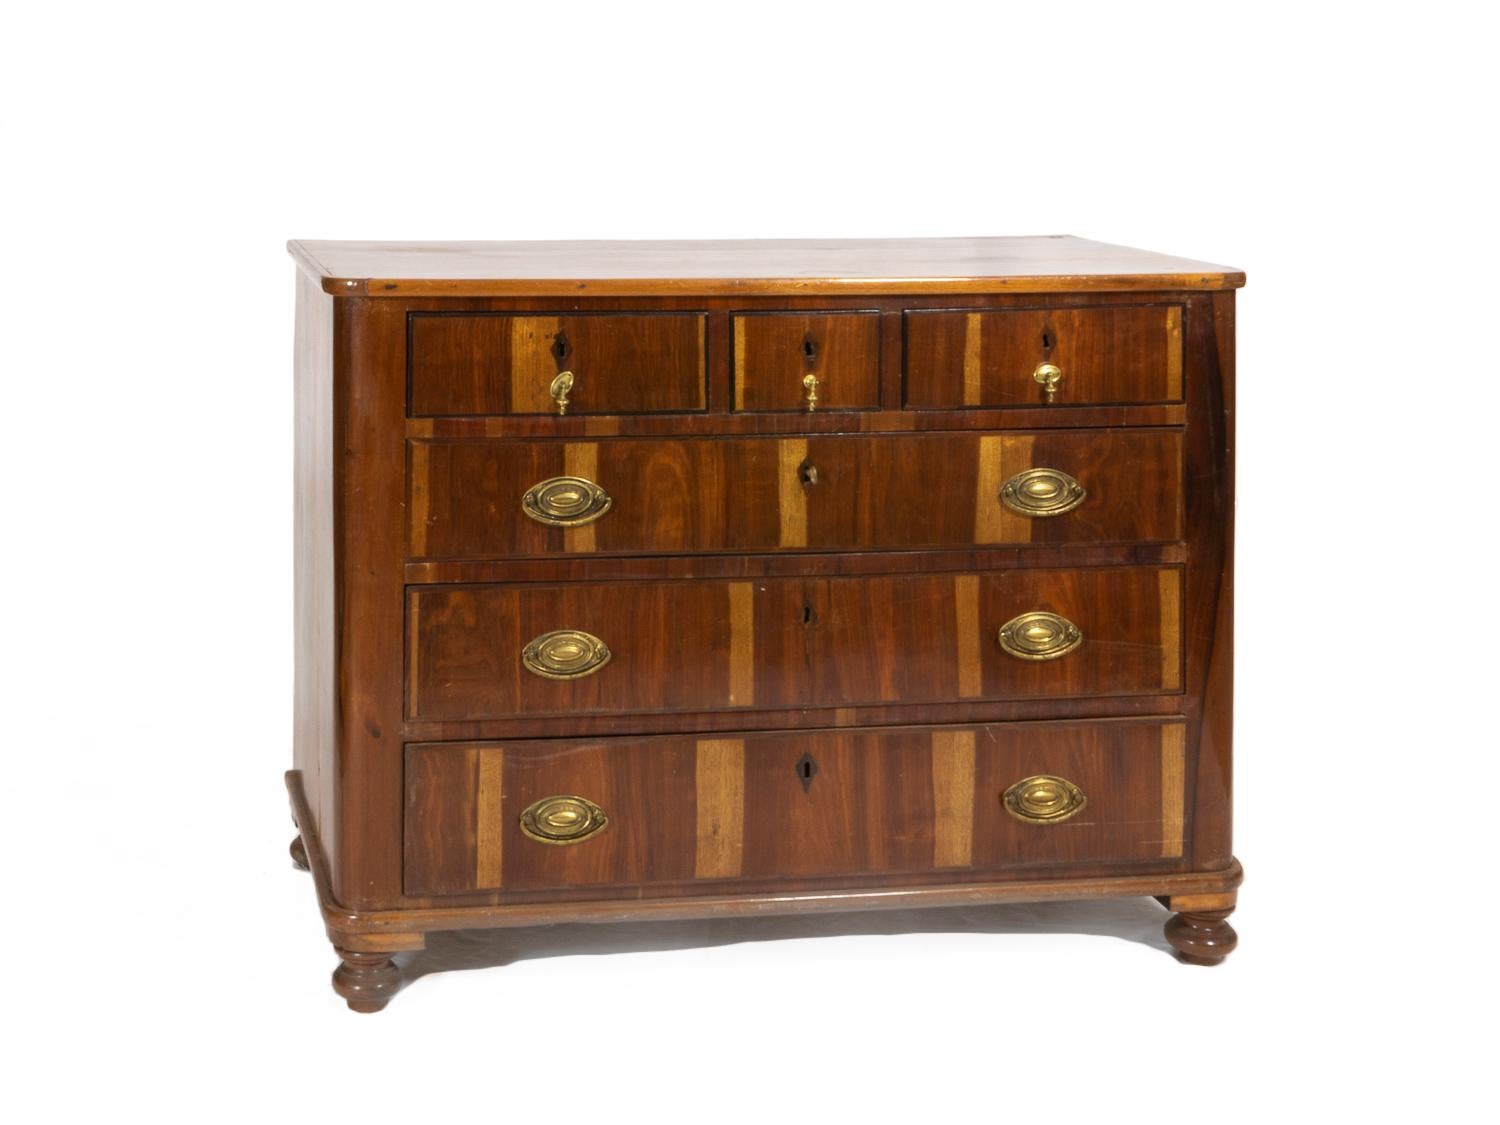 A 19th Century rare chest of drawers in vinhático (mahogany from the Madeira Island) with excellent marquetry work and circular gilded metal fittings, 3 large drawers and 3 small drawers.

Dimensions: Height 102 cm; width 65 cm; length 133